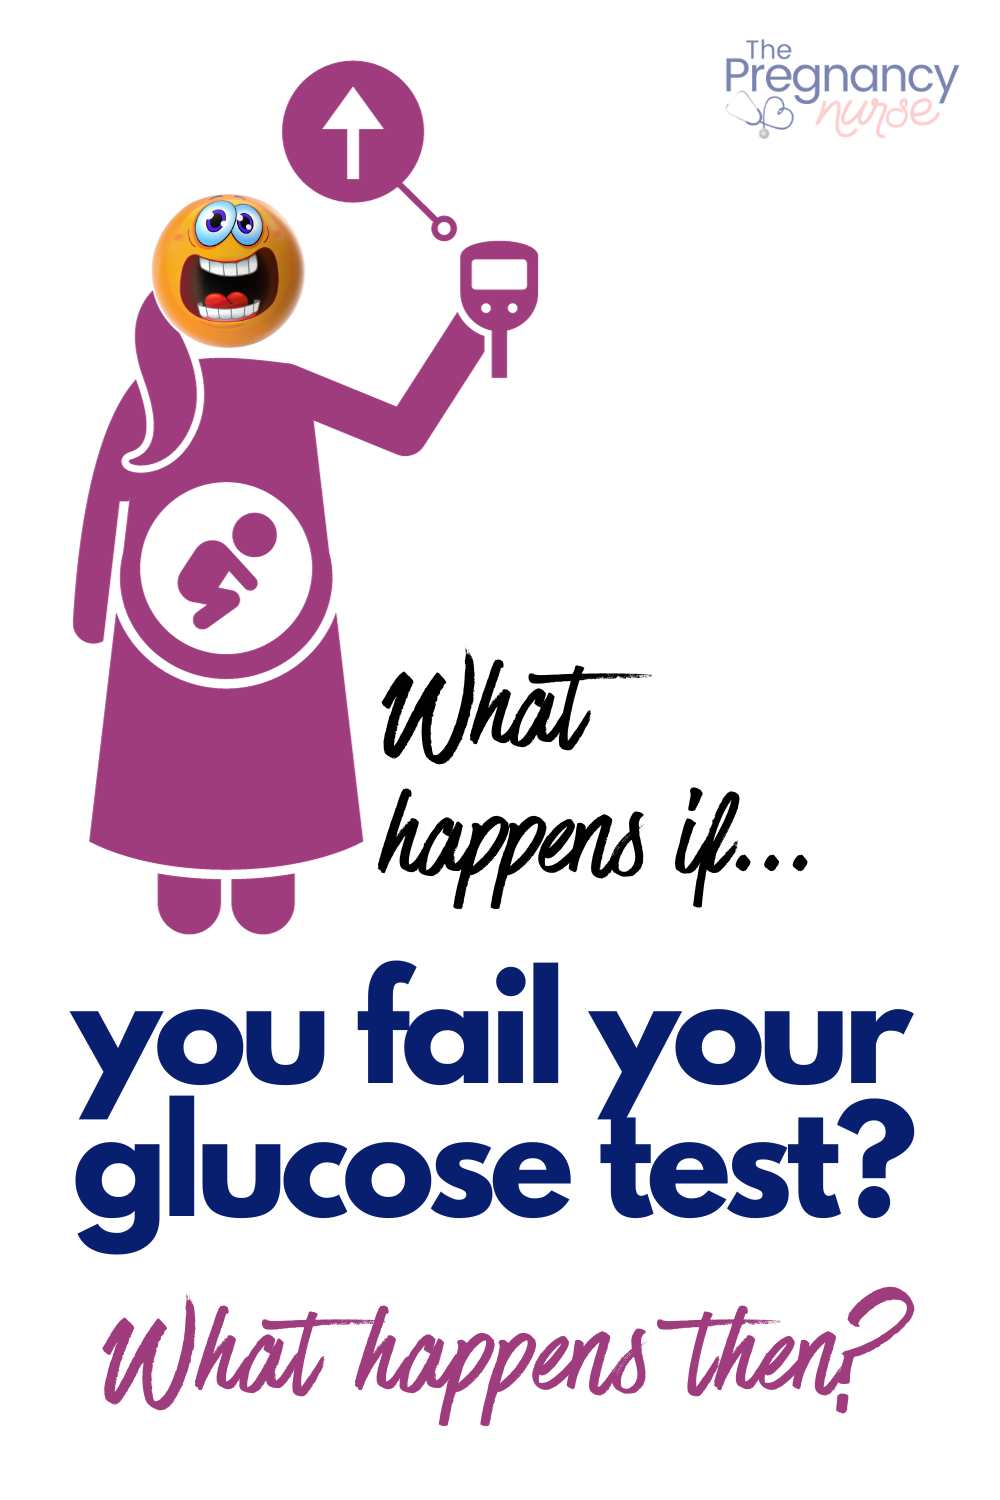 pregnant woman frreaking out about high blood sugar / what happens if you fail your glucose test? What happens then?